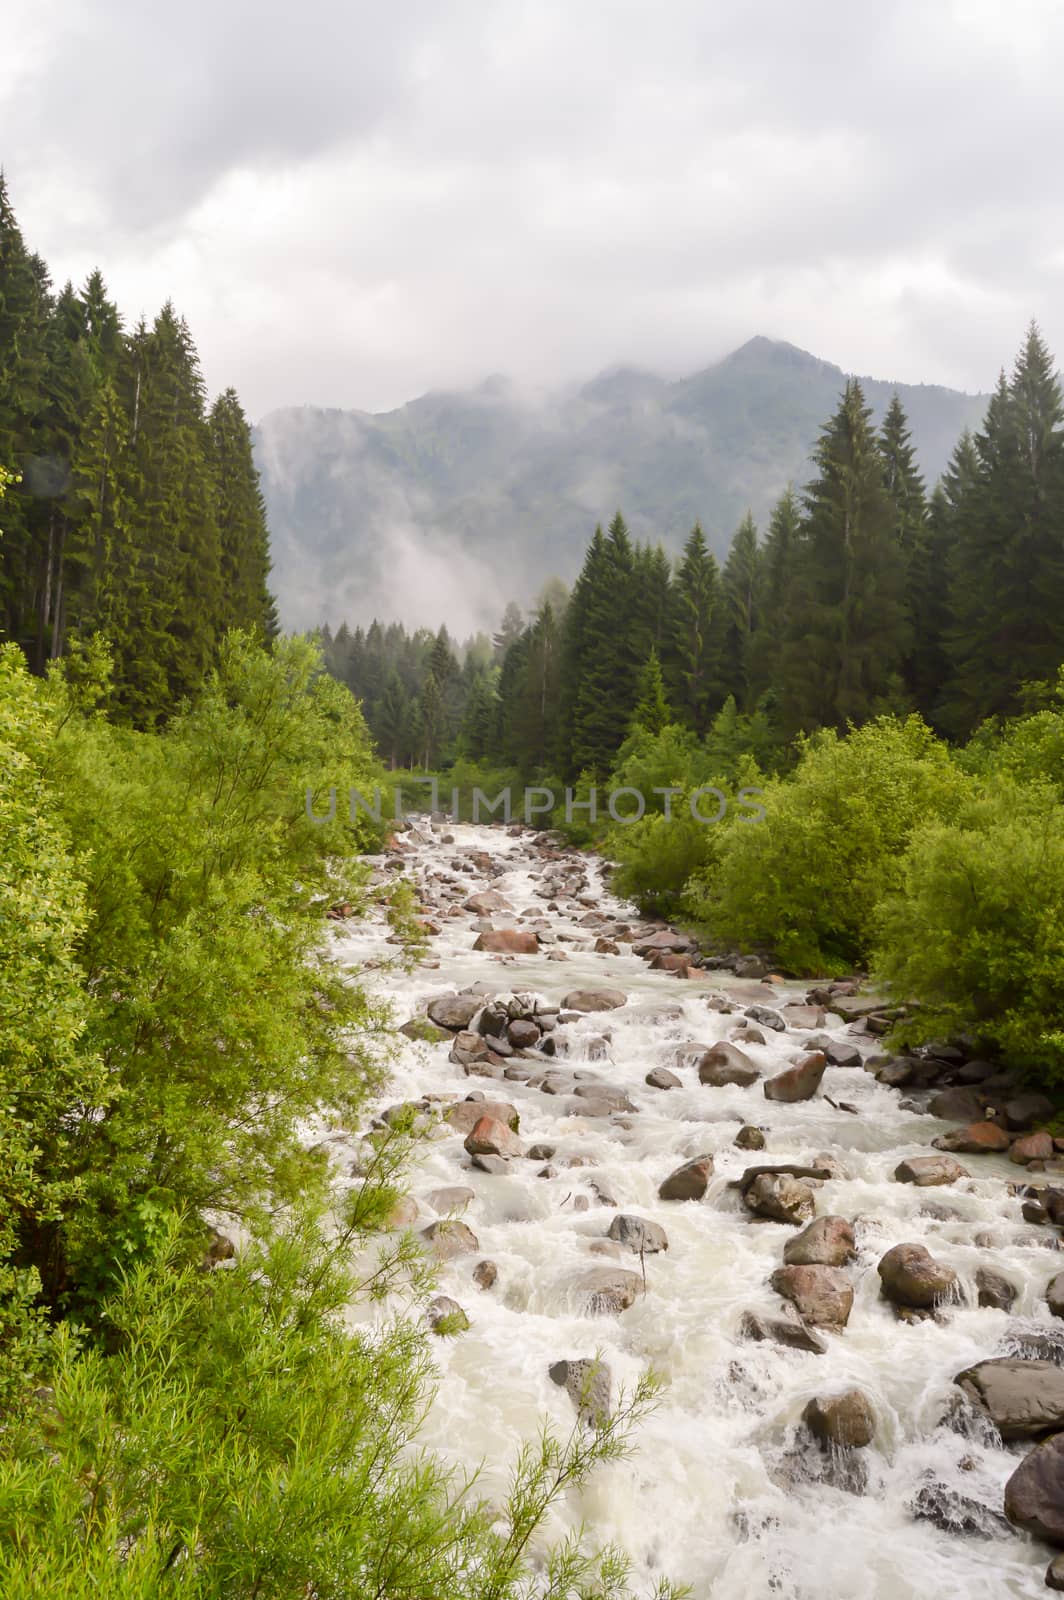 River turning into a torrent by the dolomite rains in Italy